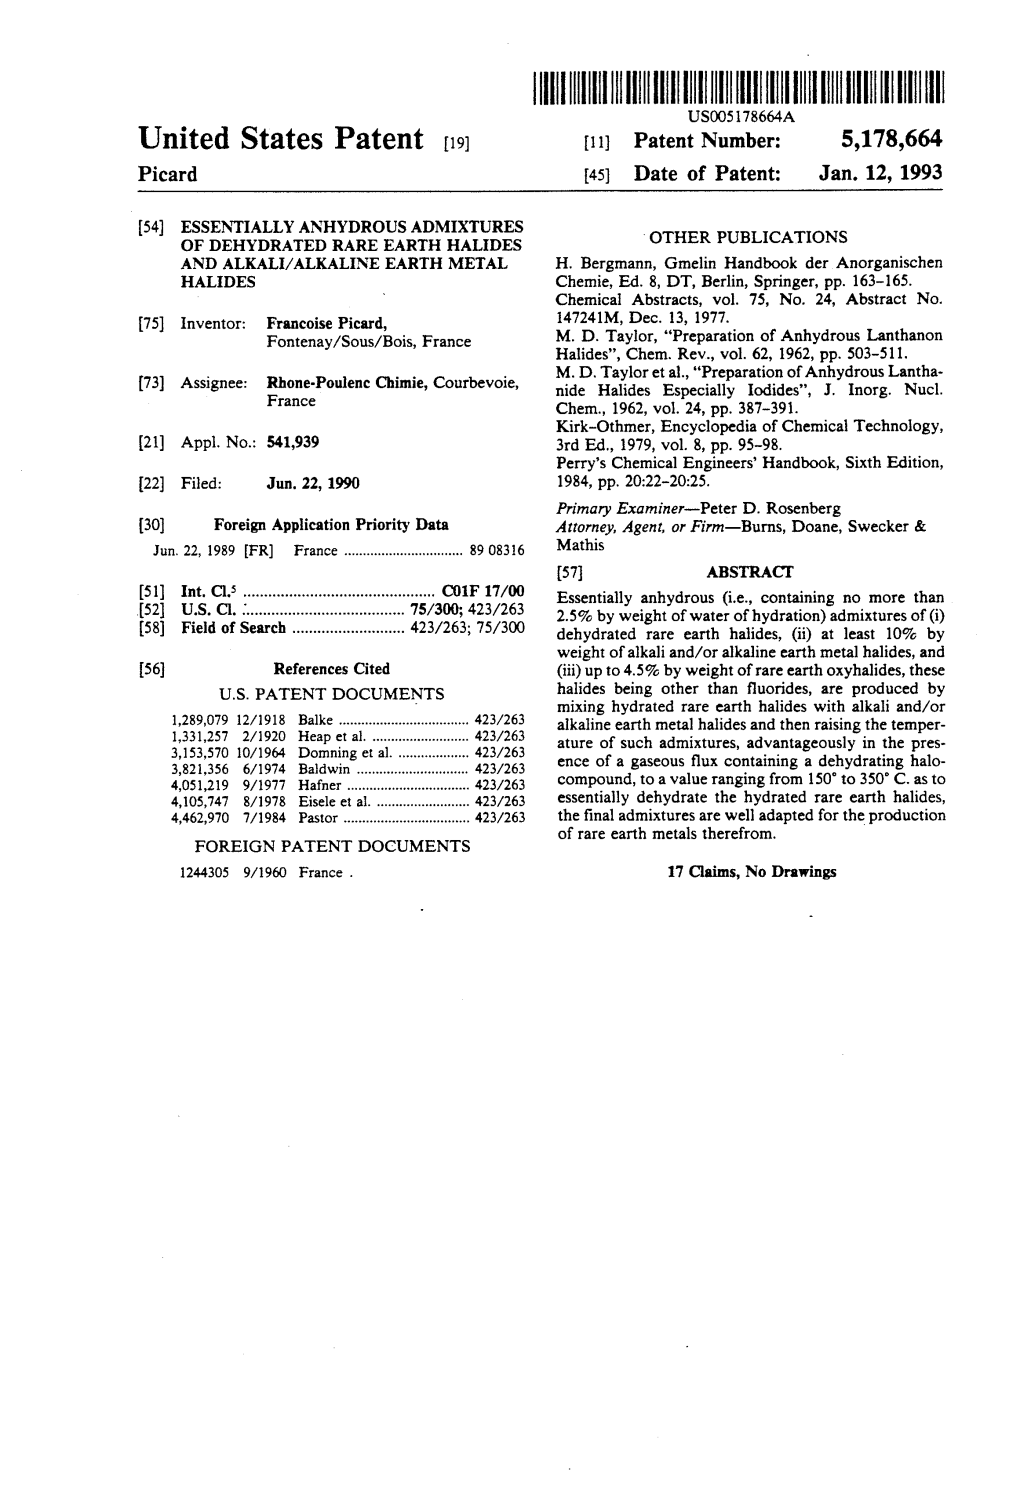 United States Patent (19) 11) Patent Number: 5,178,664 Picard 45) Date of Patent: Jan